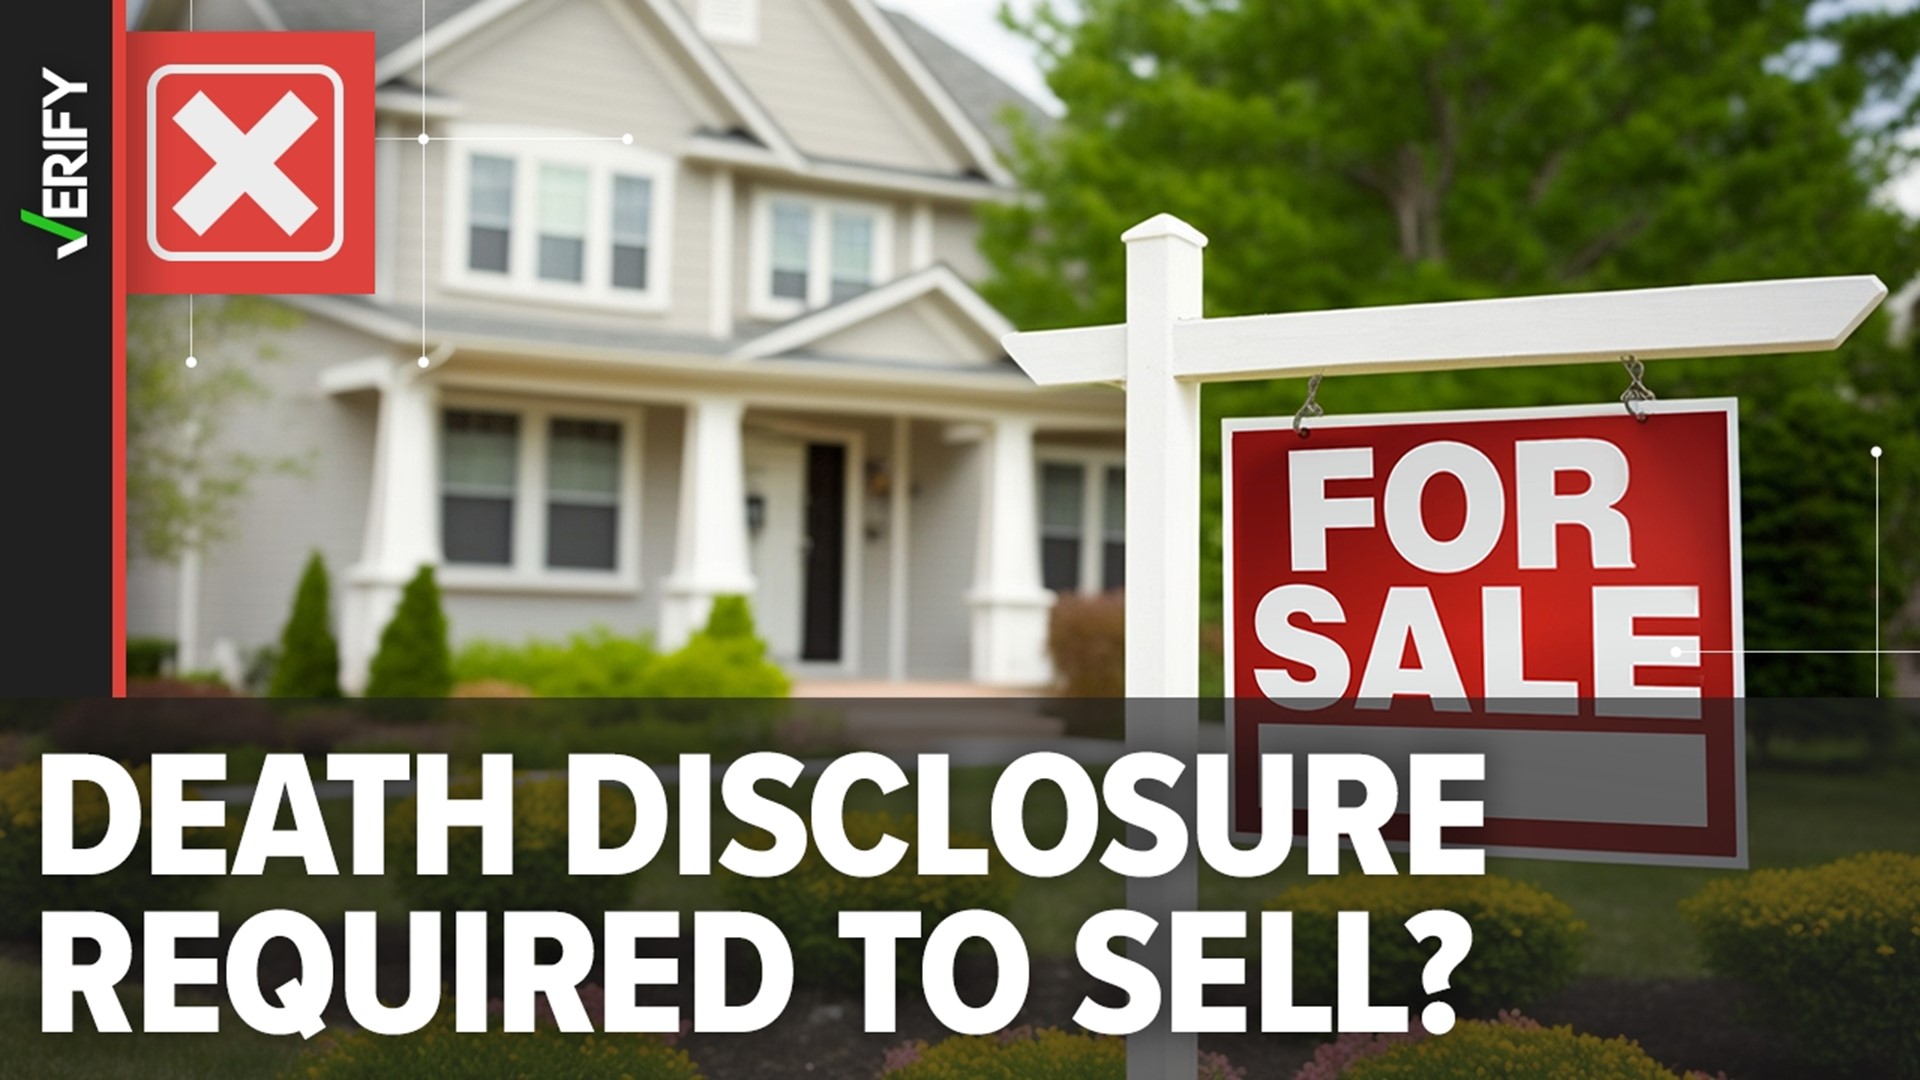 On social media, posts have said in the U.S., home sellers may be required to tell buyers if someone had previously died in the home for sale. Is this true?